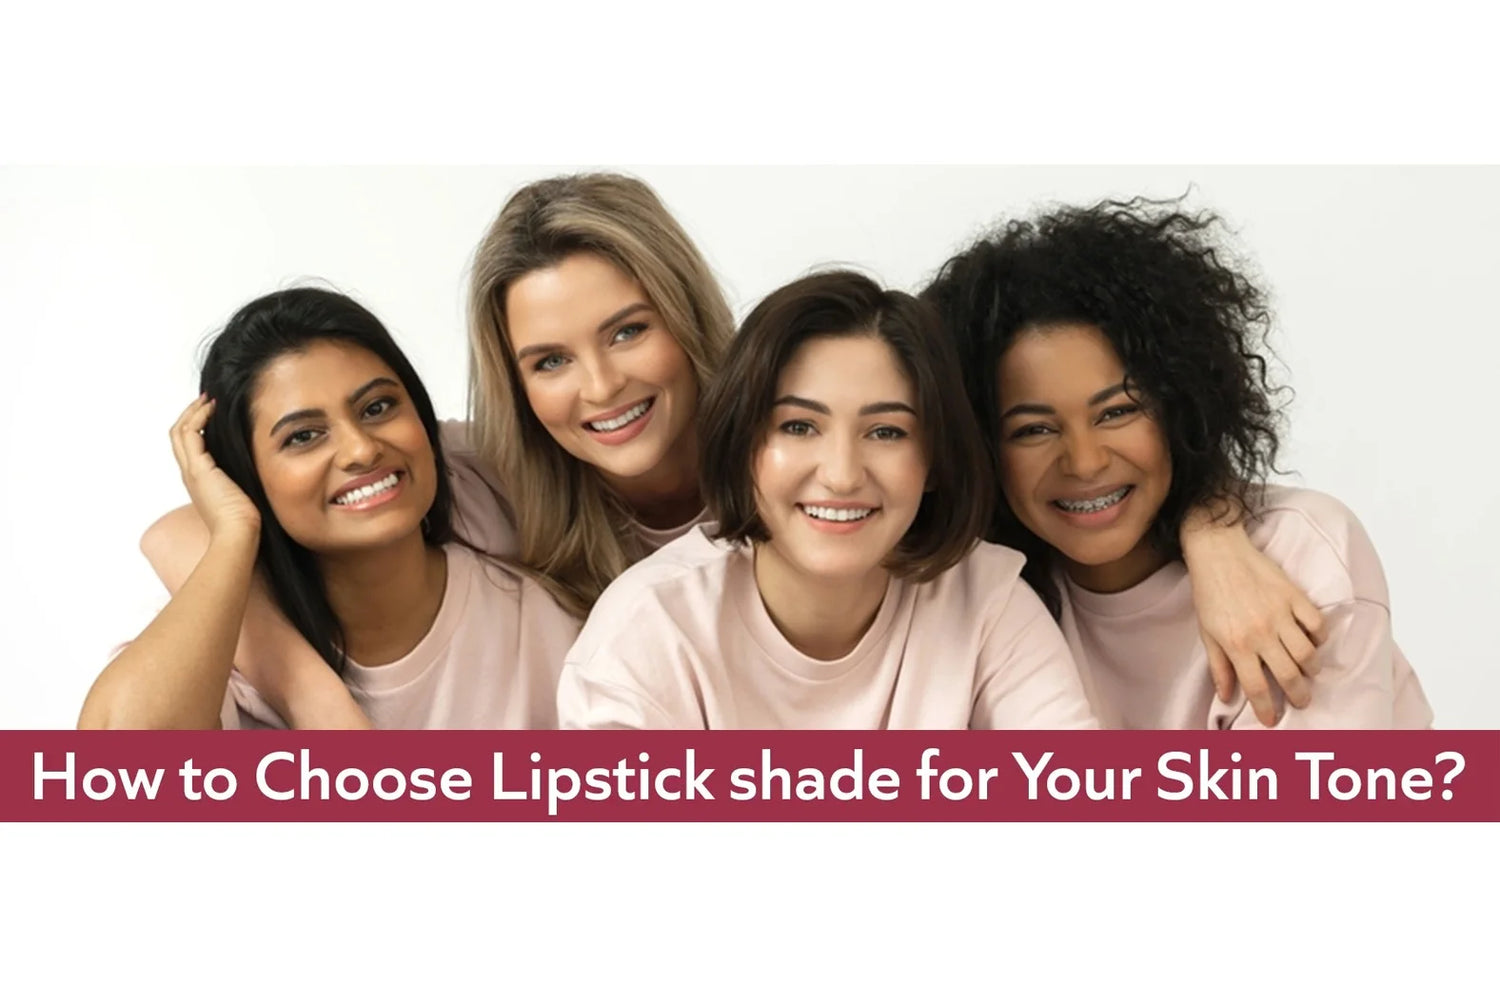 How to choose lipstick shade for your skin tone